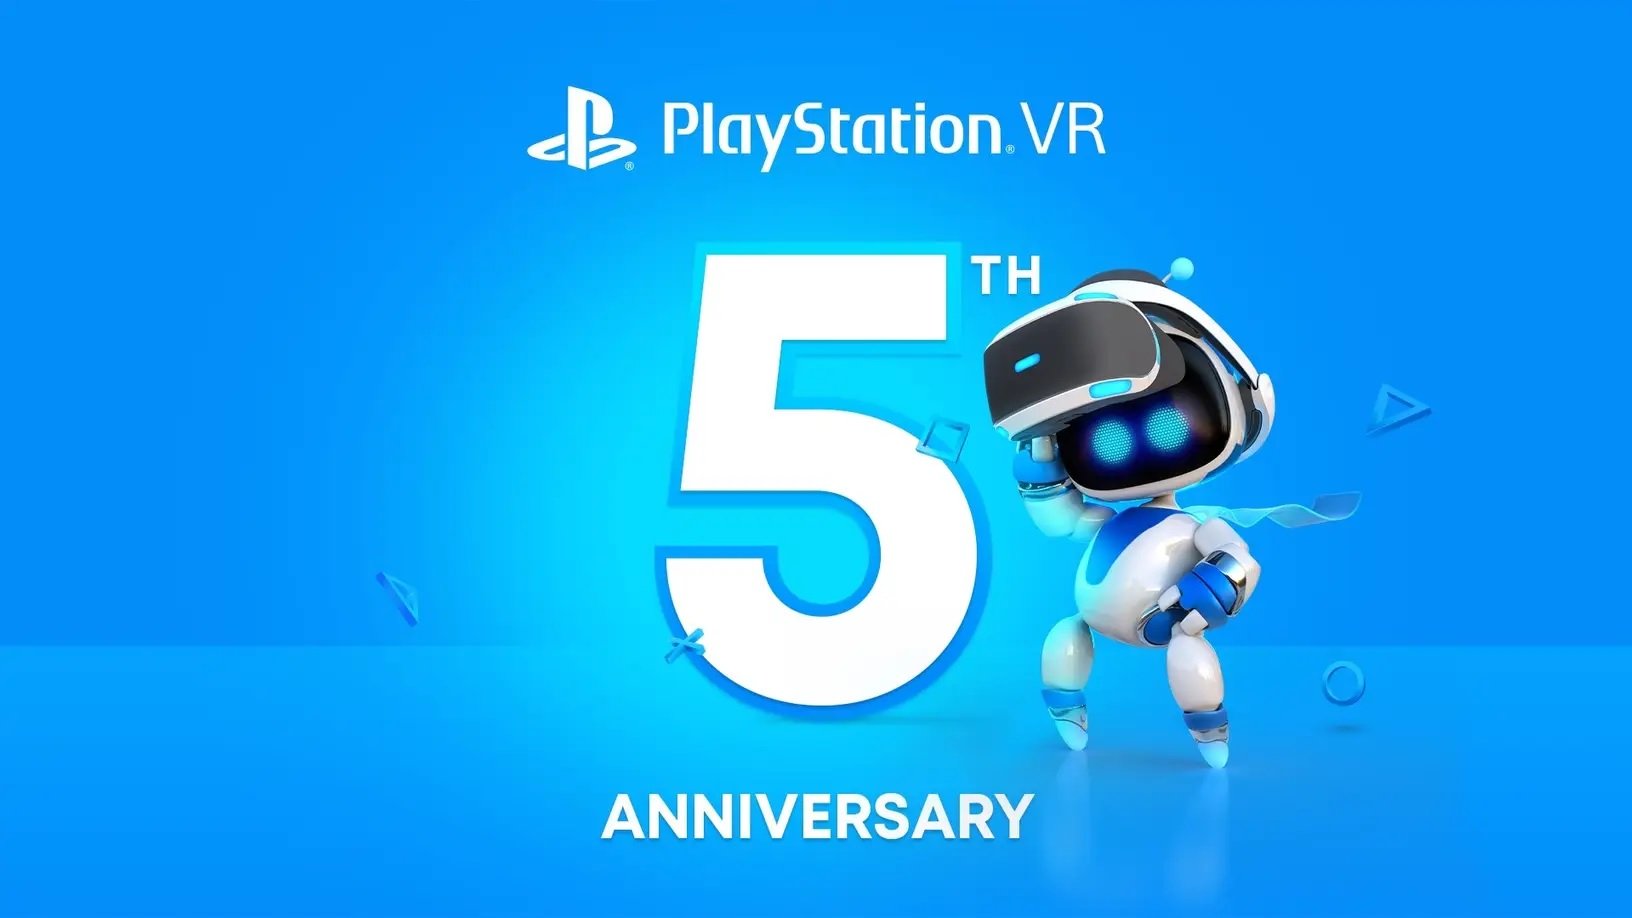 PlayStation Plus games will include 3 bonus PS VR titles | VGC